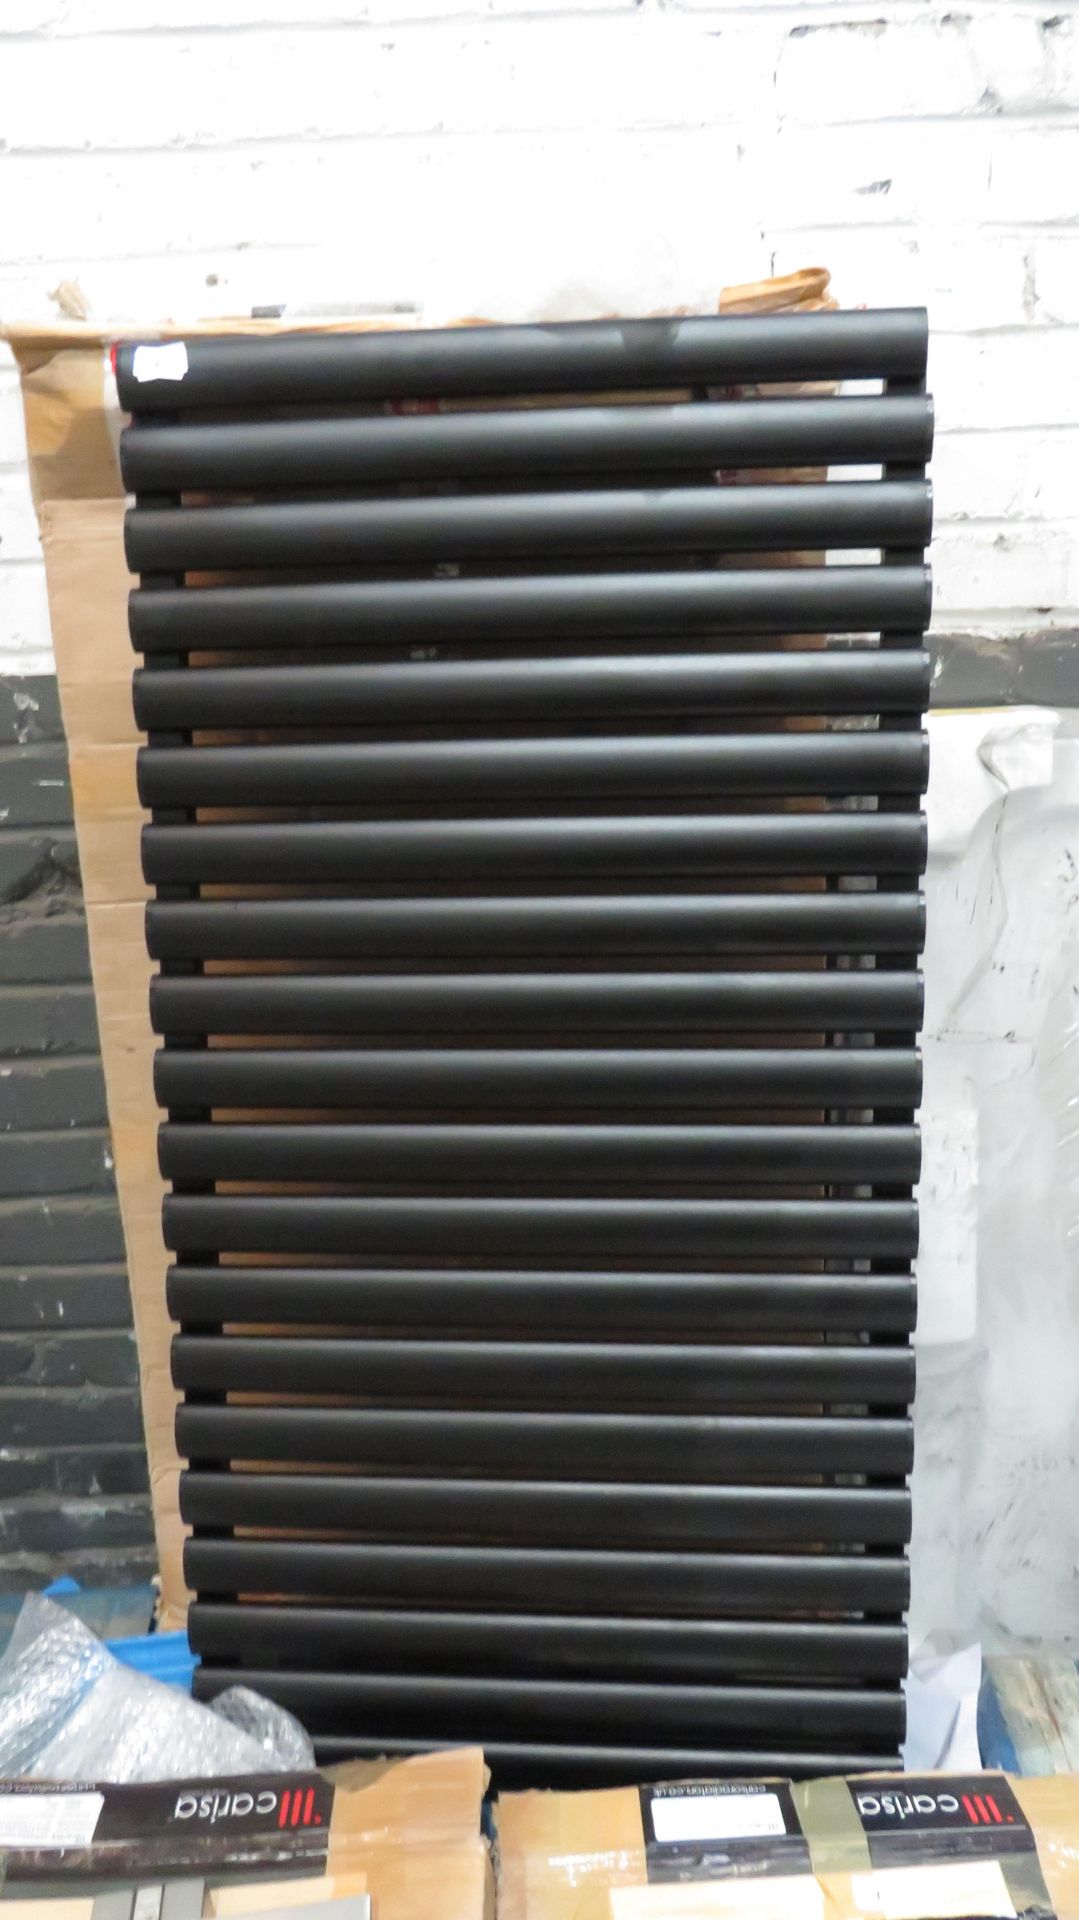 Carisa Tallis Radiator 1190 x 600mm, unchecked and boxed. Please note, this radiator is ex-display